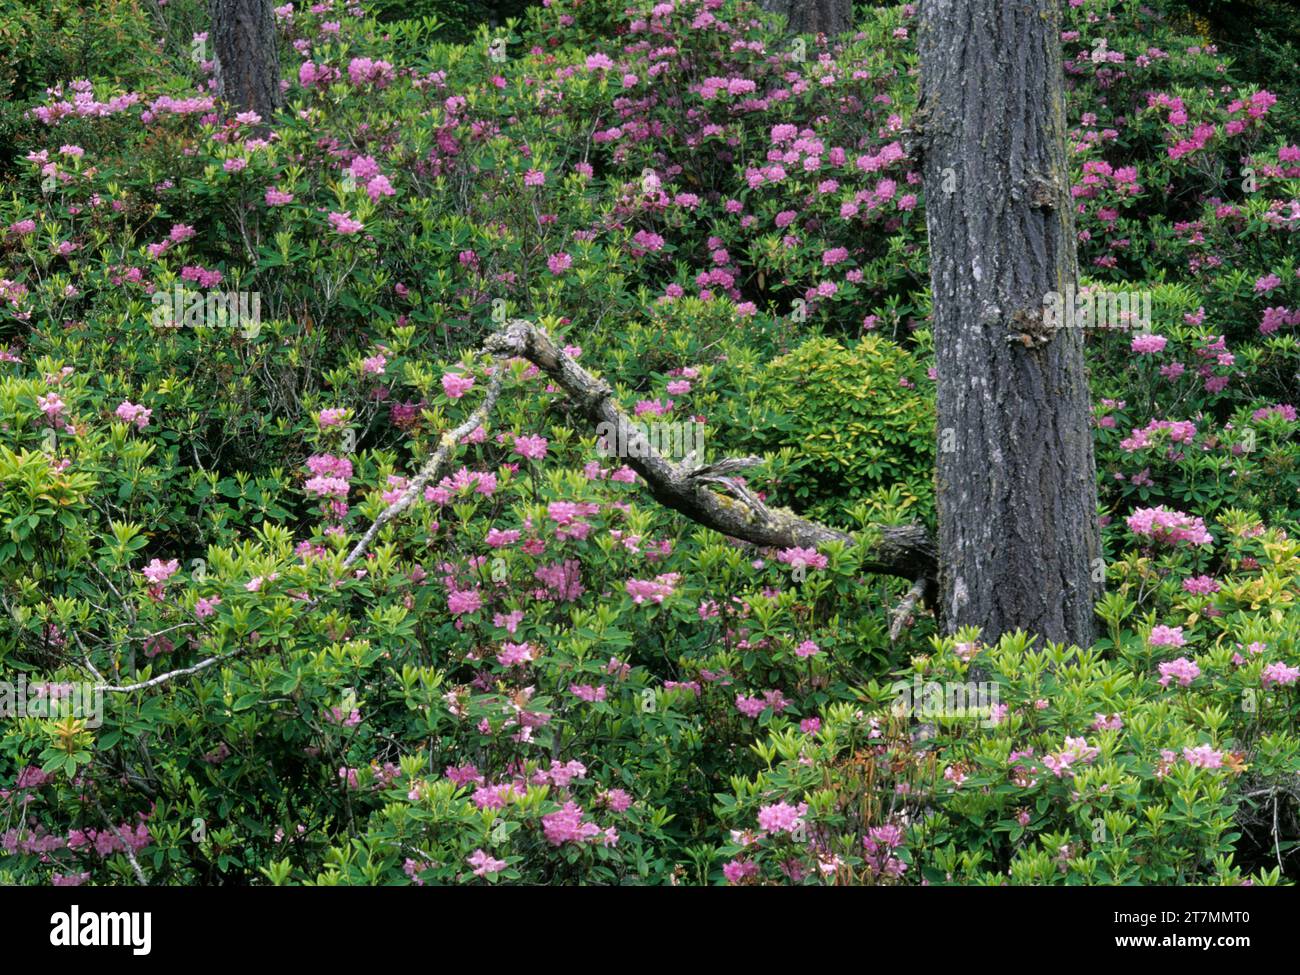 Pacific rhododendron (Rhododendron macrophyllum) in Siltcoos River area, Oregon Dunes National Recreation Area, Oregon Stock Photo